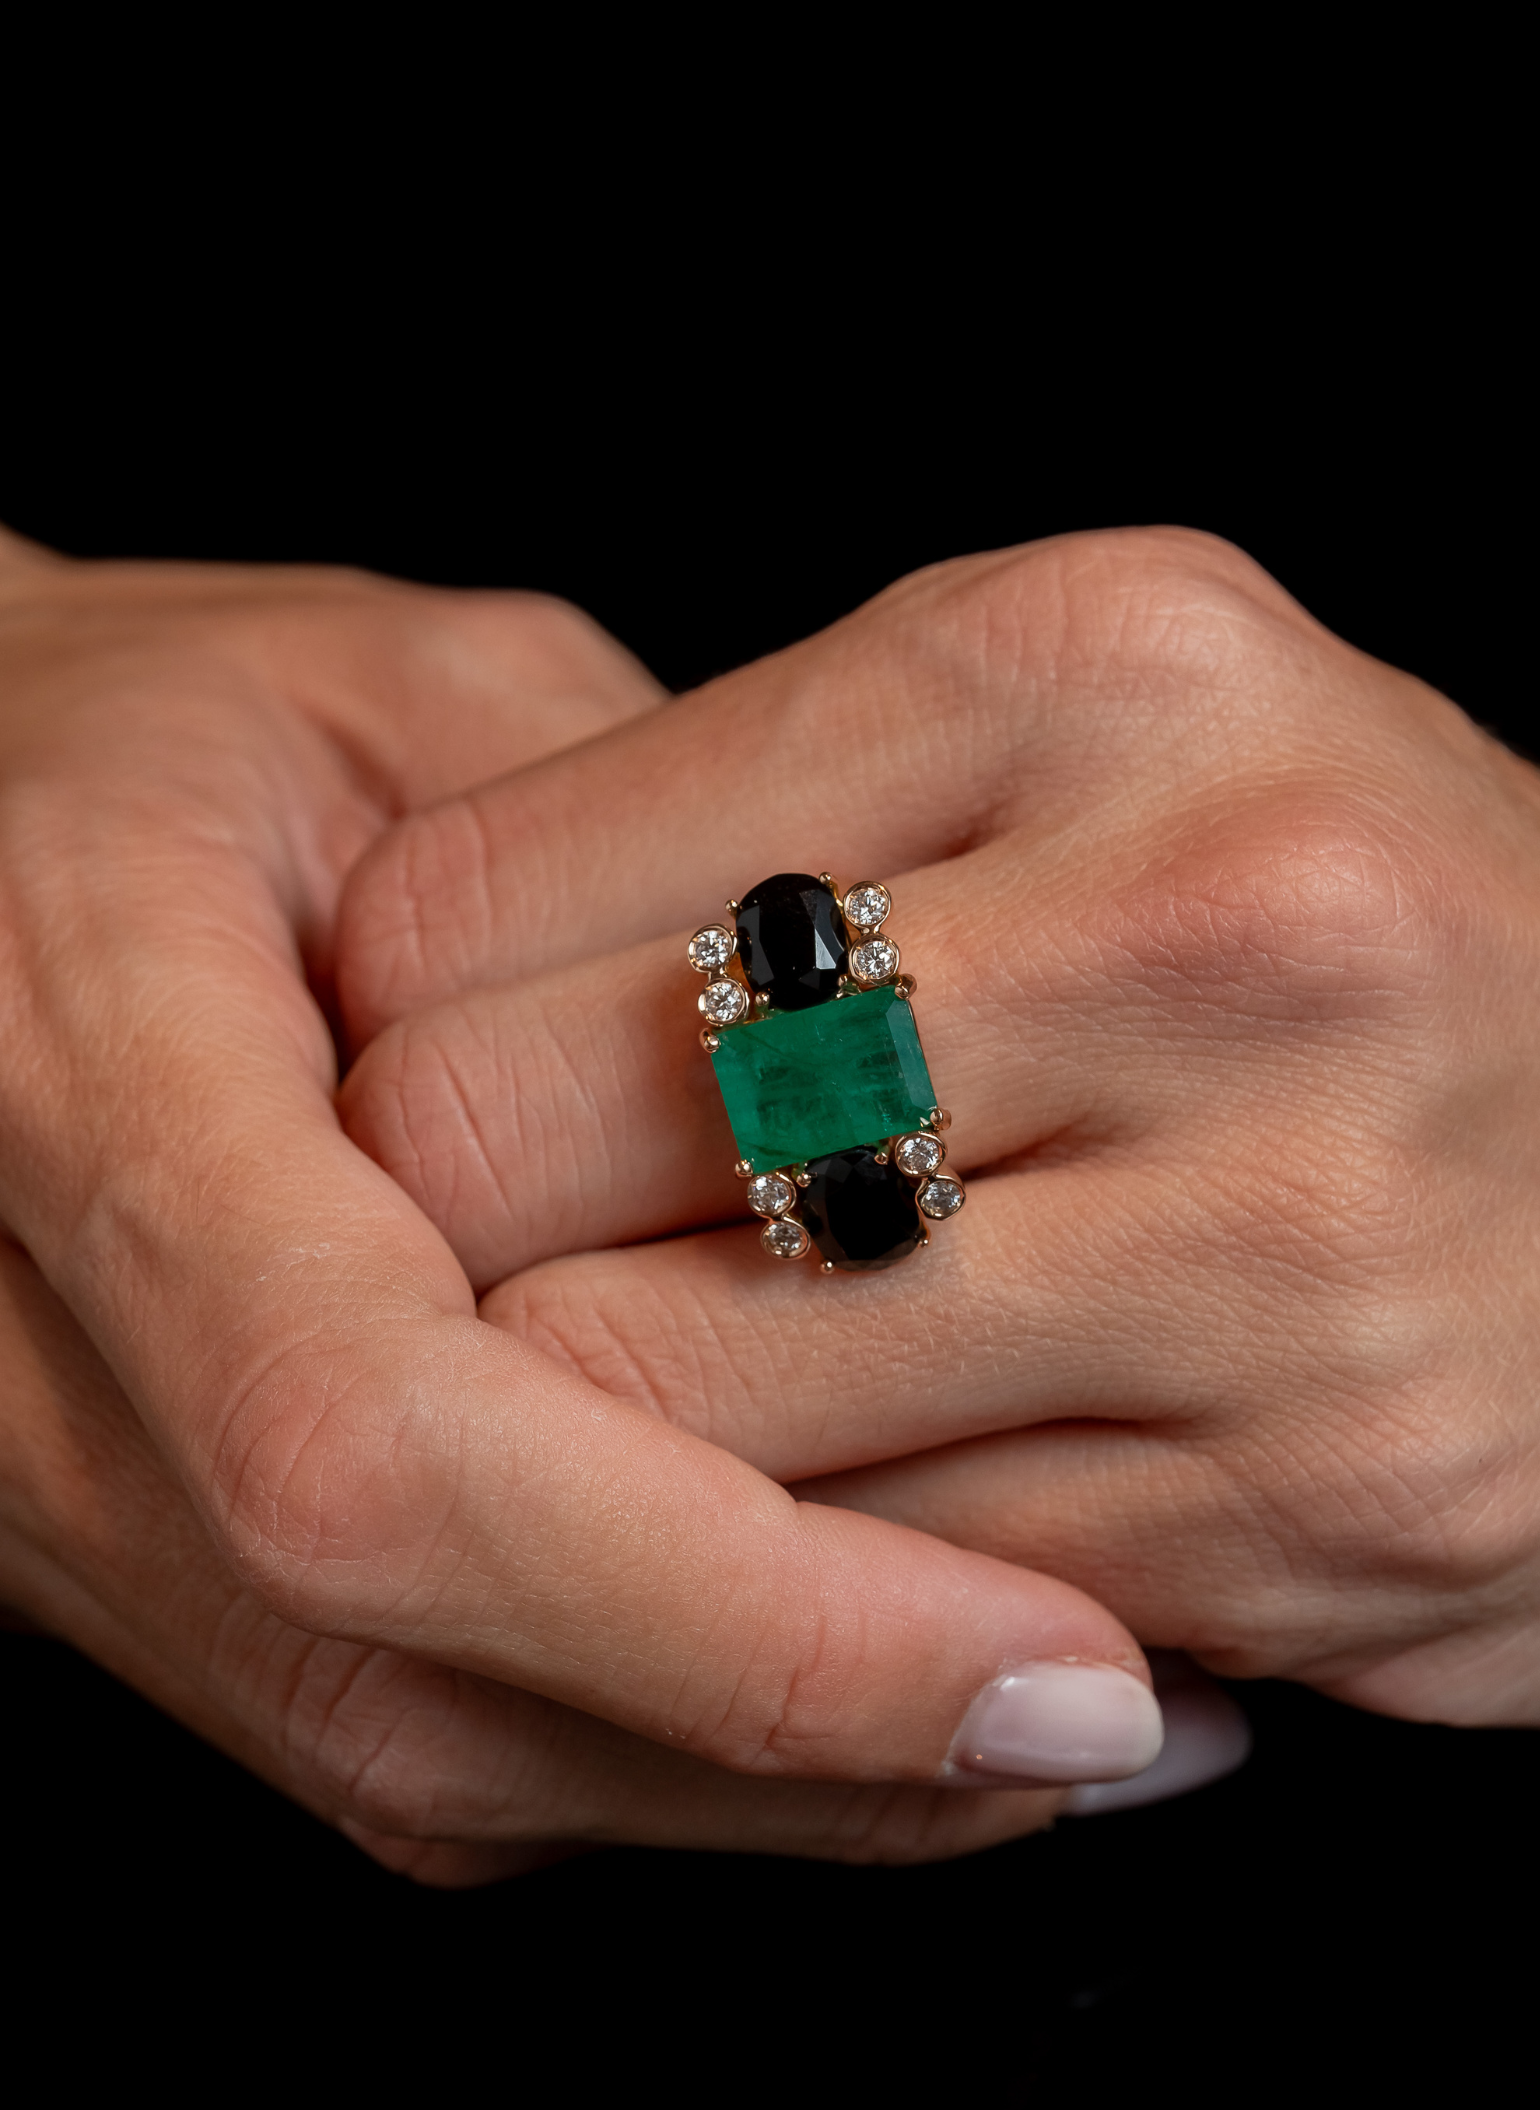 Le Gemme Emerald, Diamonds and Onyx Ring